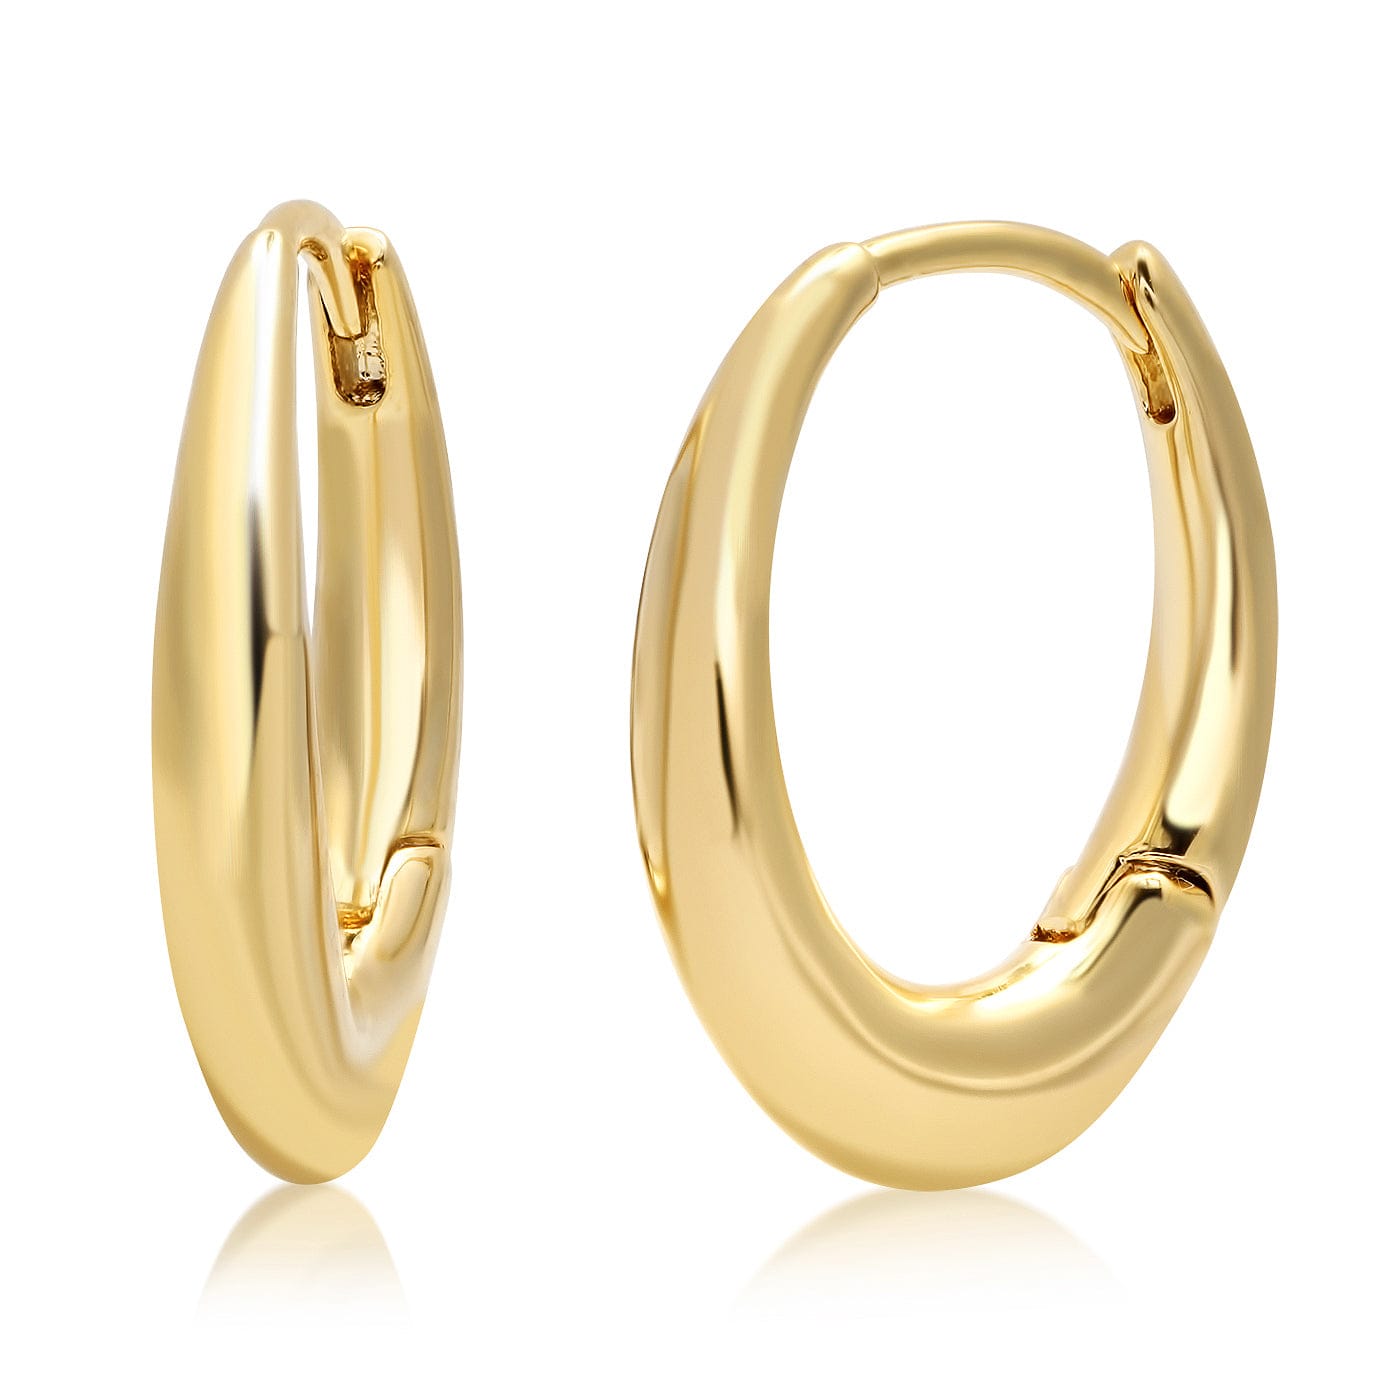 TAI JEWELRY Earrings Gold Oval Hoop With Snap Closure